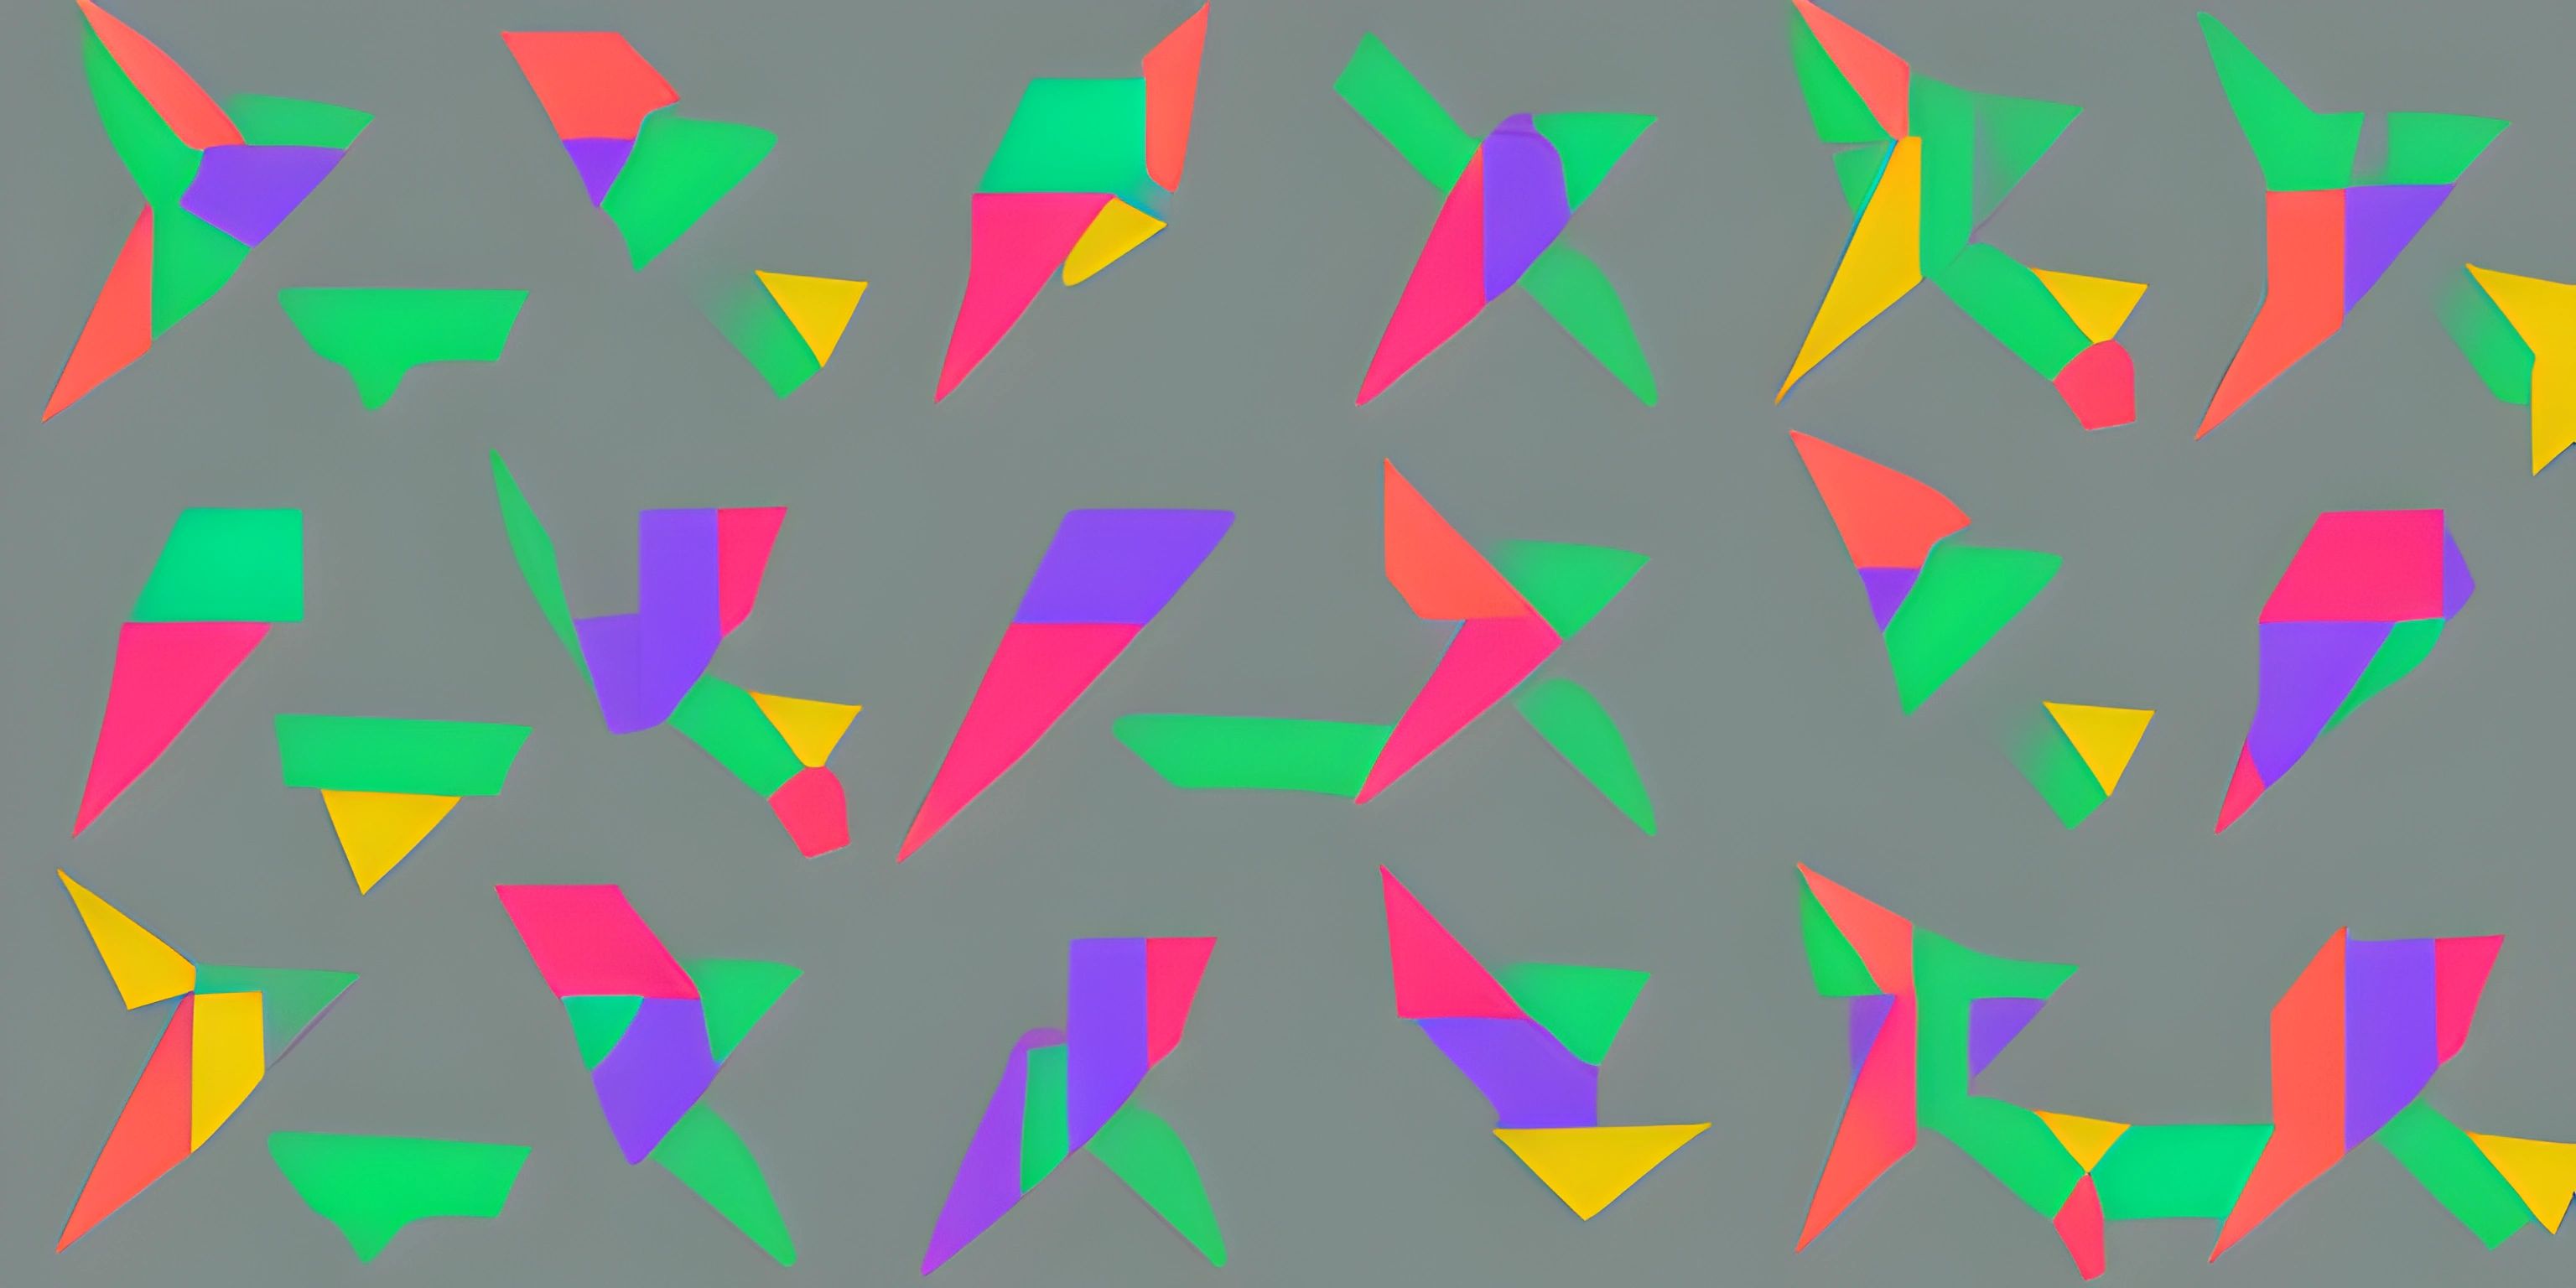 a gray background has colorful arrows and triangles coming together in bright colors, as shown from the top left